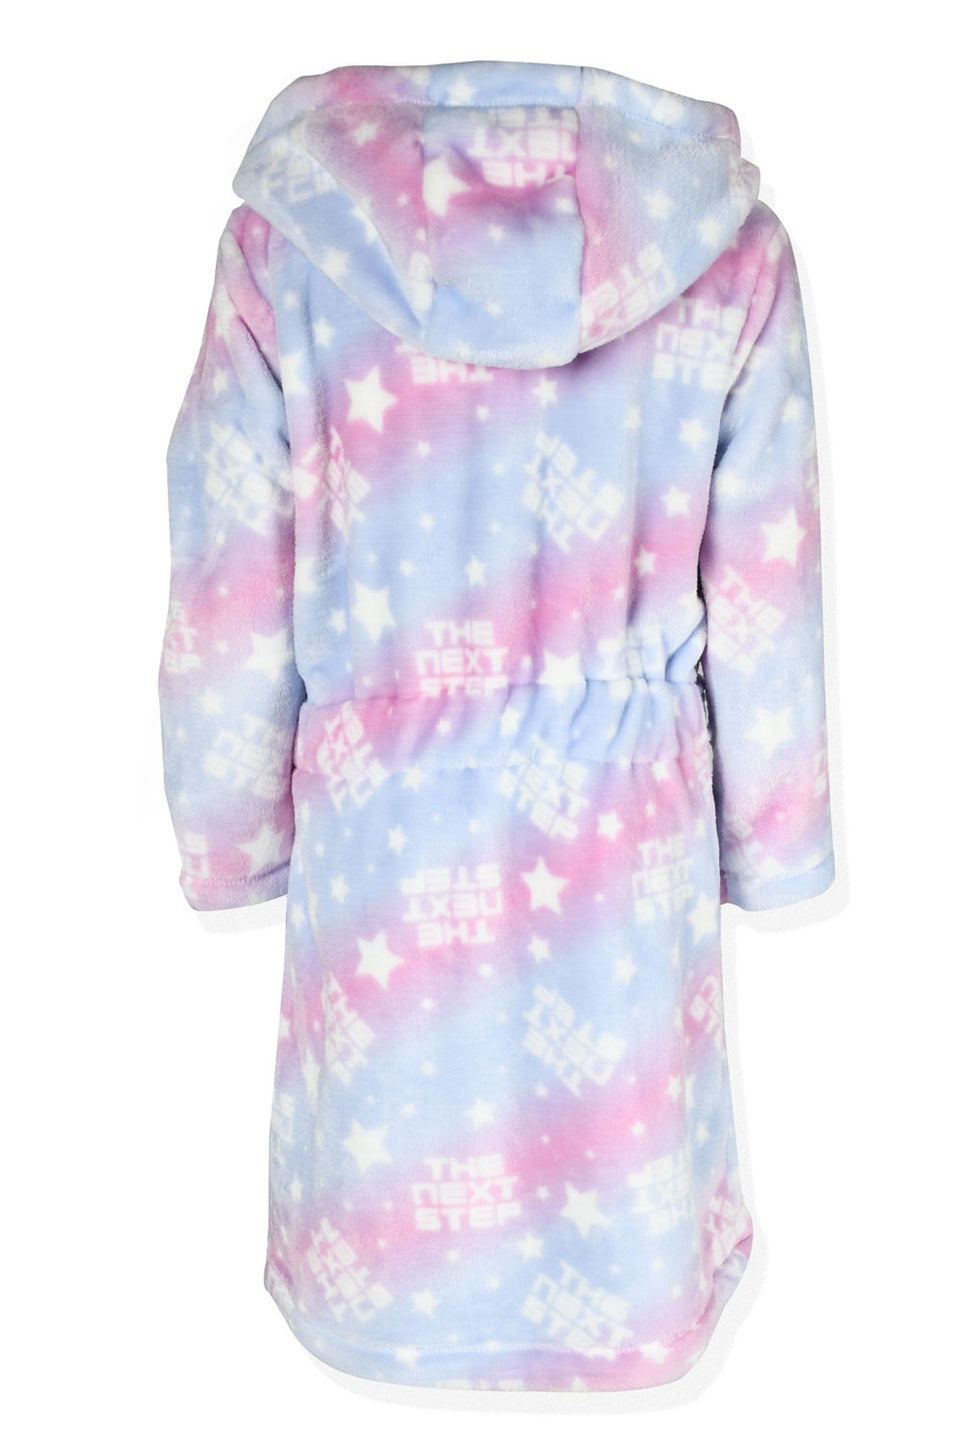 The Next Steps Kids Purple Dressing Gown (7-12 yrs)